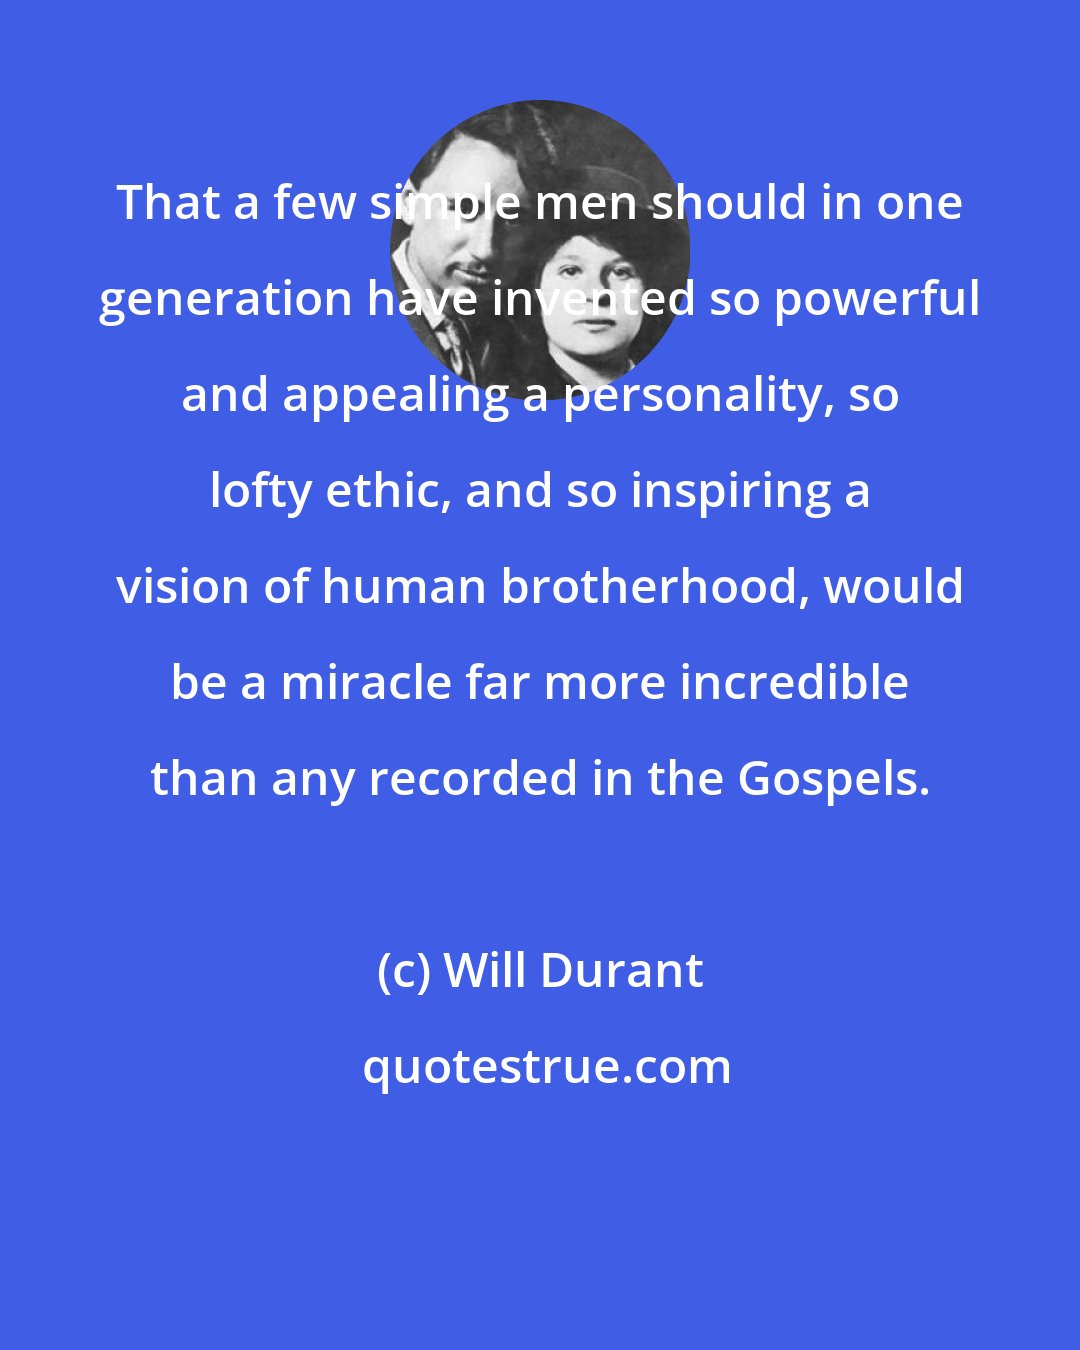 Will Durant: That a few simple men should in one generation have invented so powerful and appealing a personality, so lofty ethic, and so inspiring a vision of human brotherhood, would be a miracle far more incredible than any recorded in the Gospels.